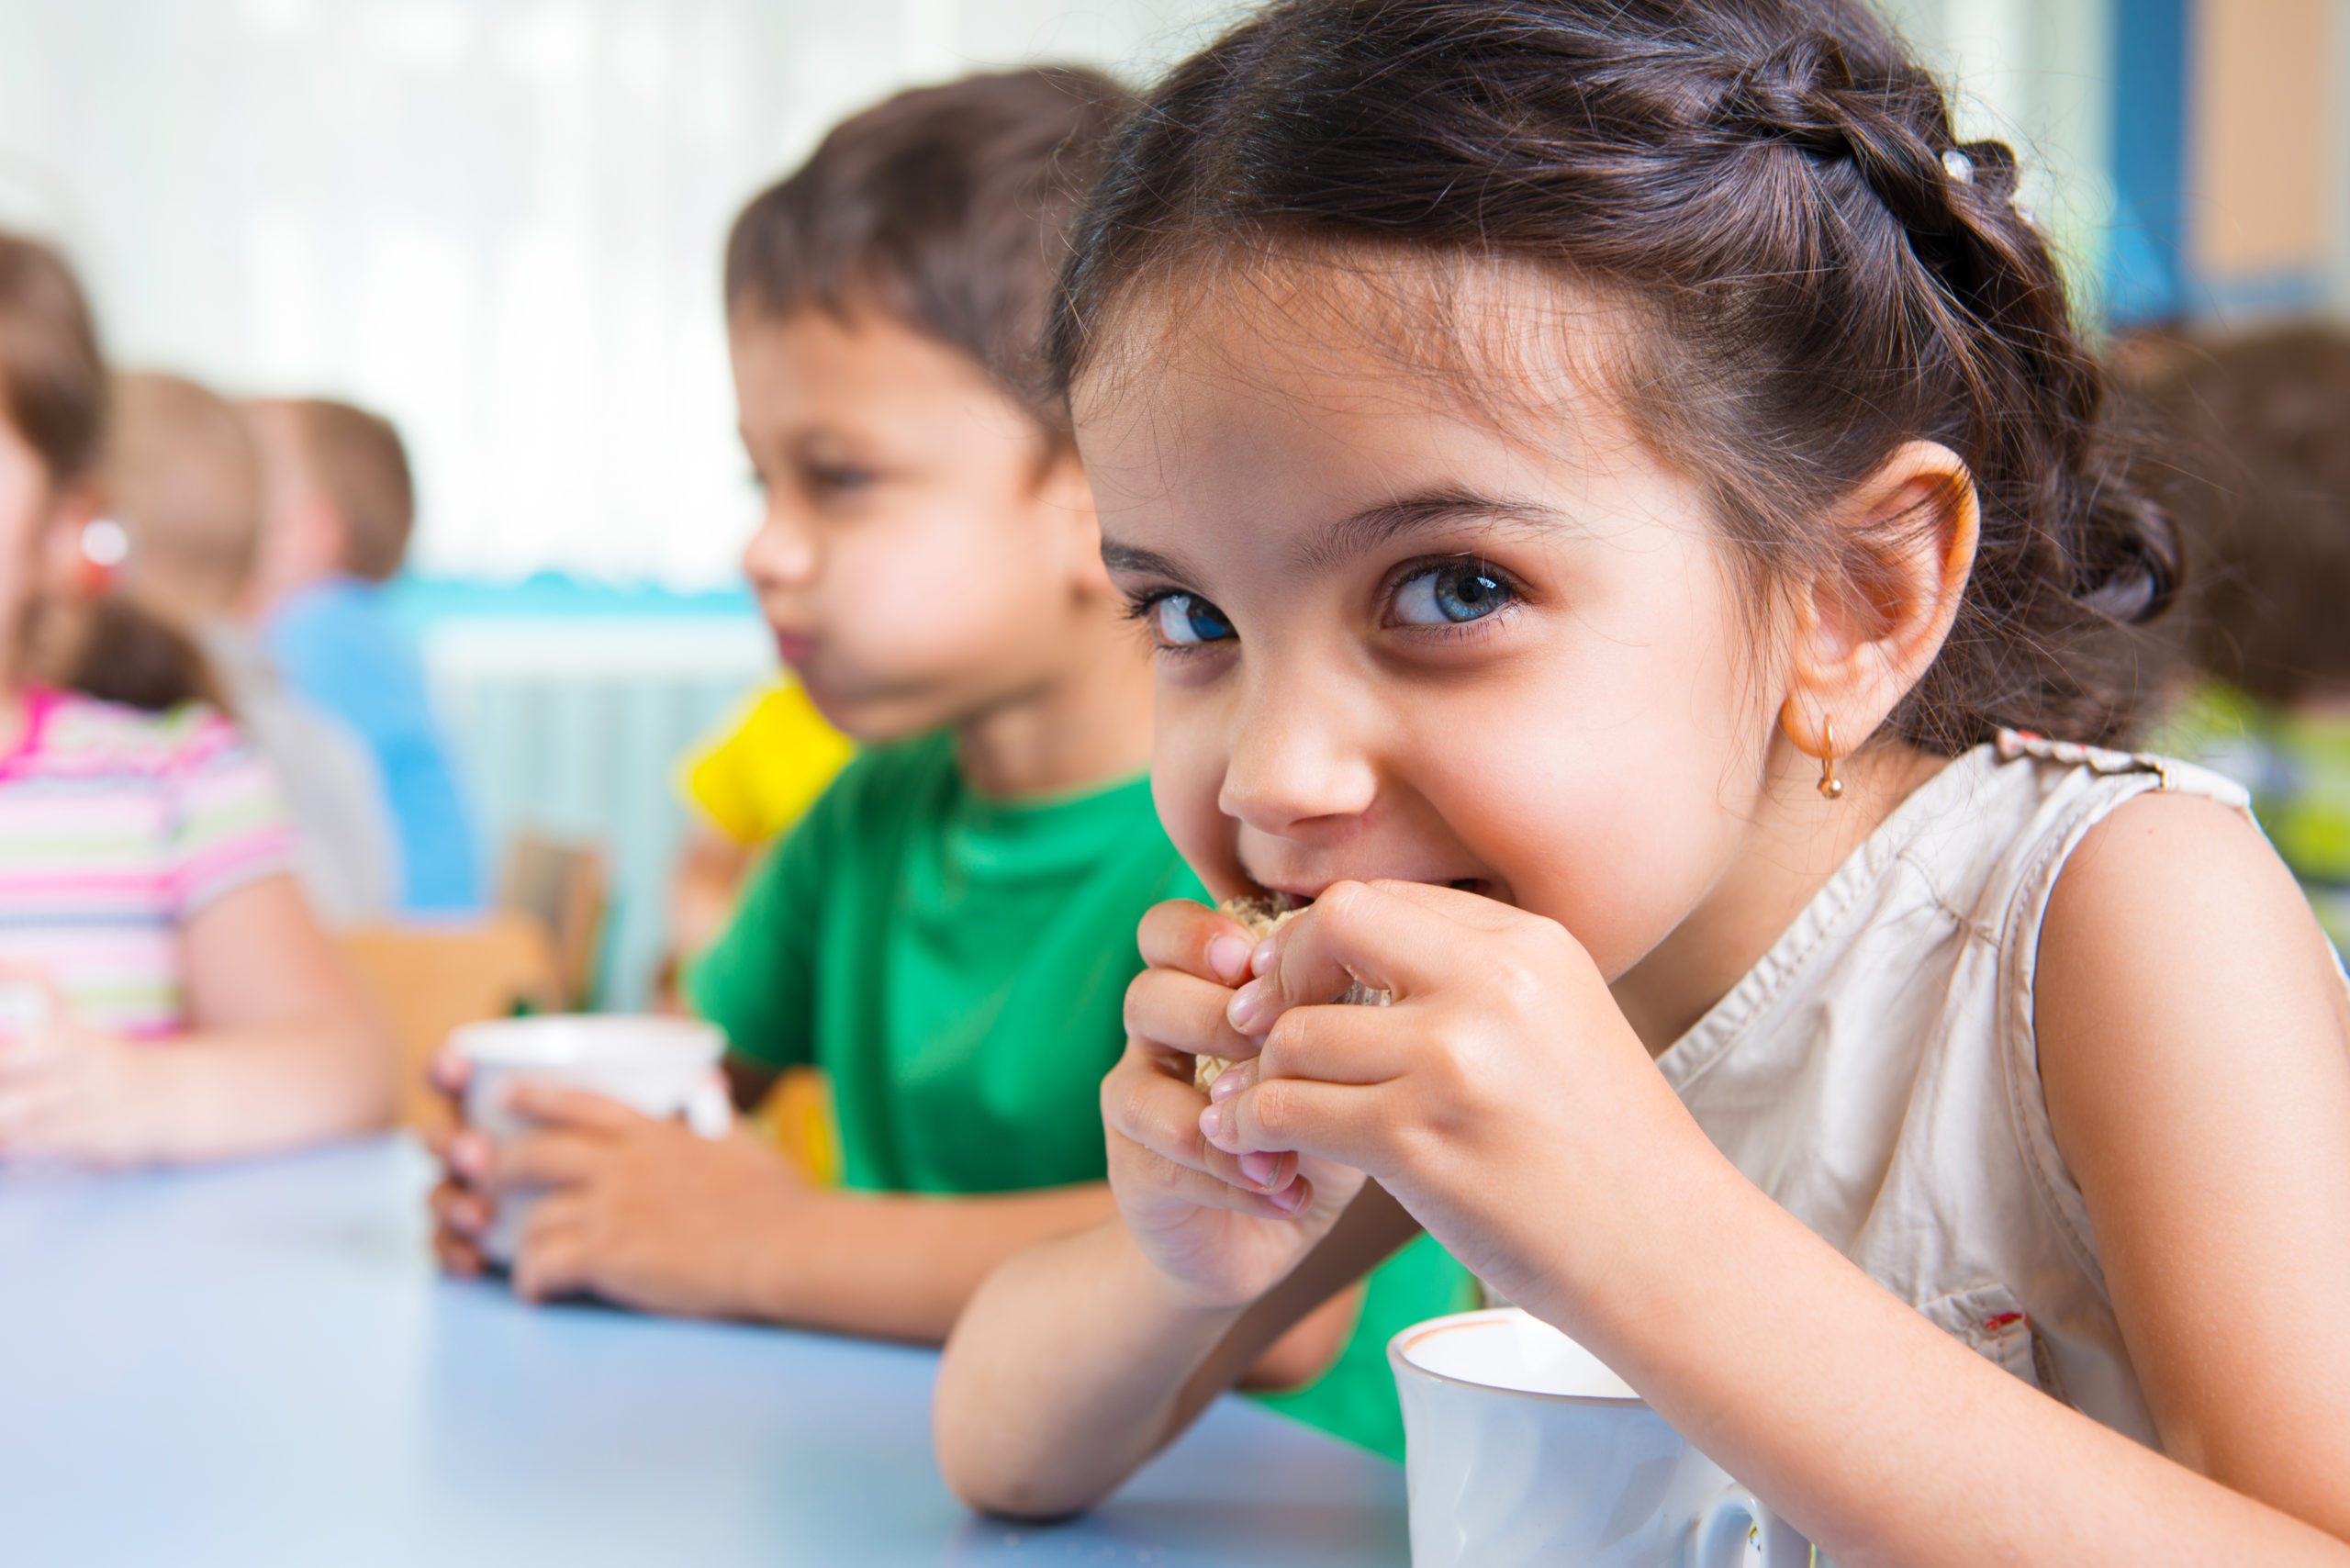 Proper Nutrition is Linked to Preschool Success at Kids 'R' Kids New Territory, preschool, daycare, childcare